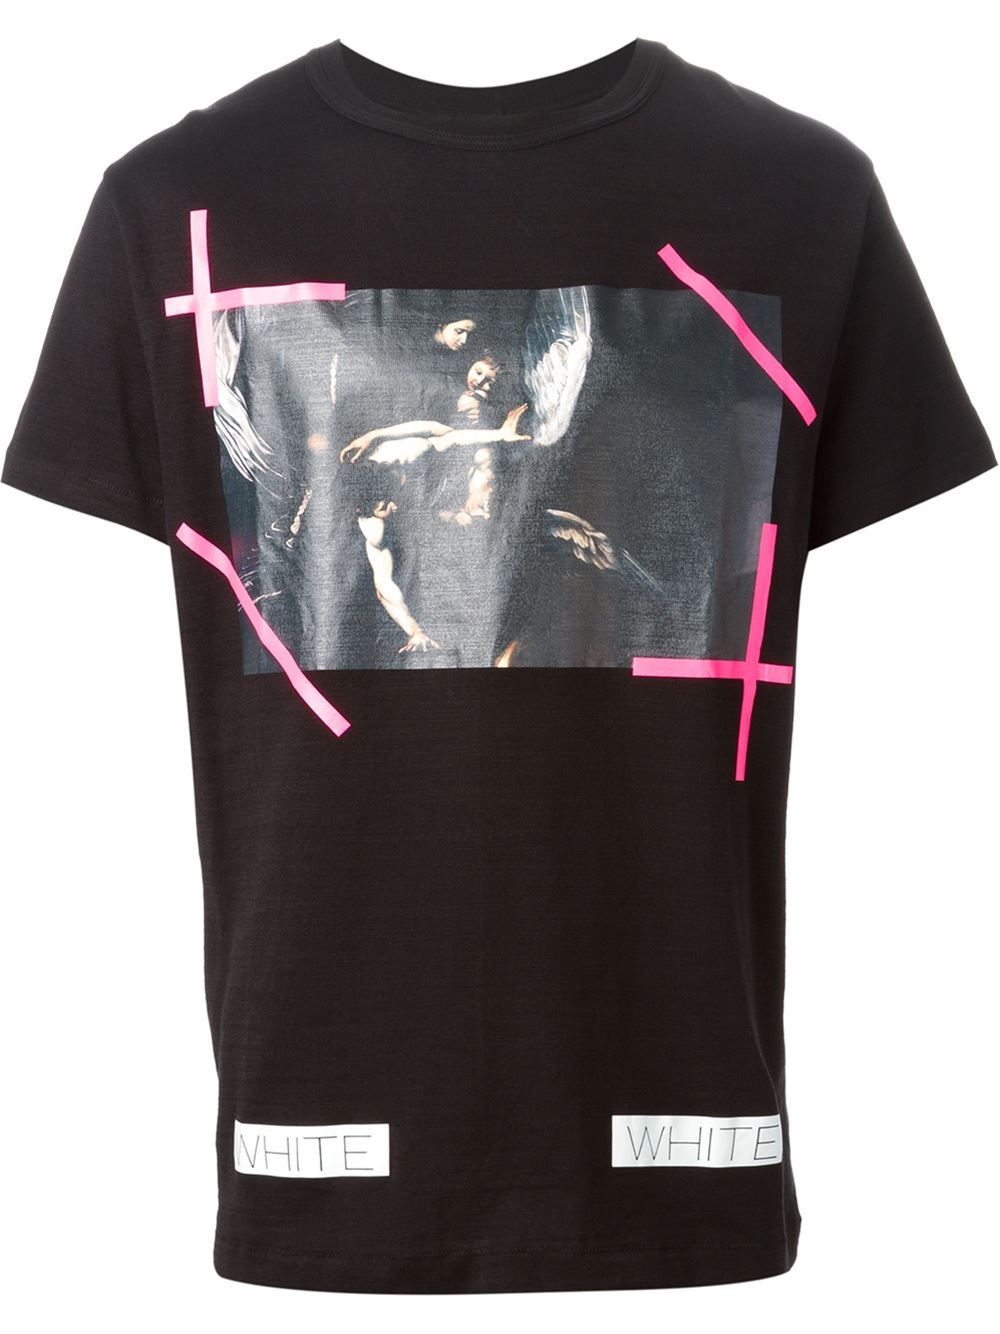 Buy > black and pink off white t shirt > in stock